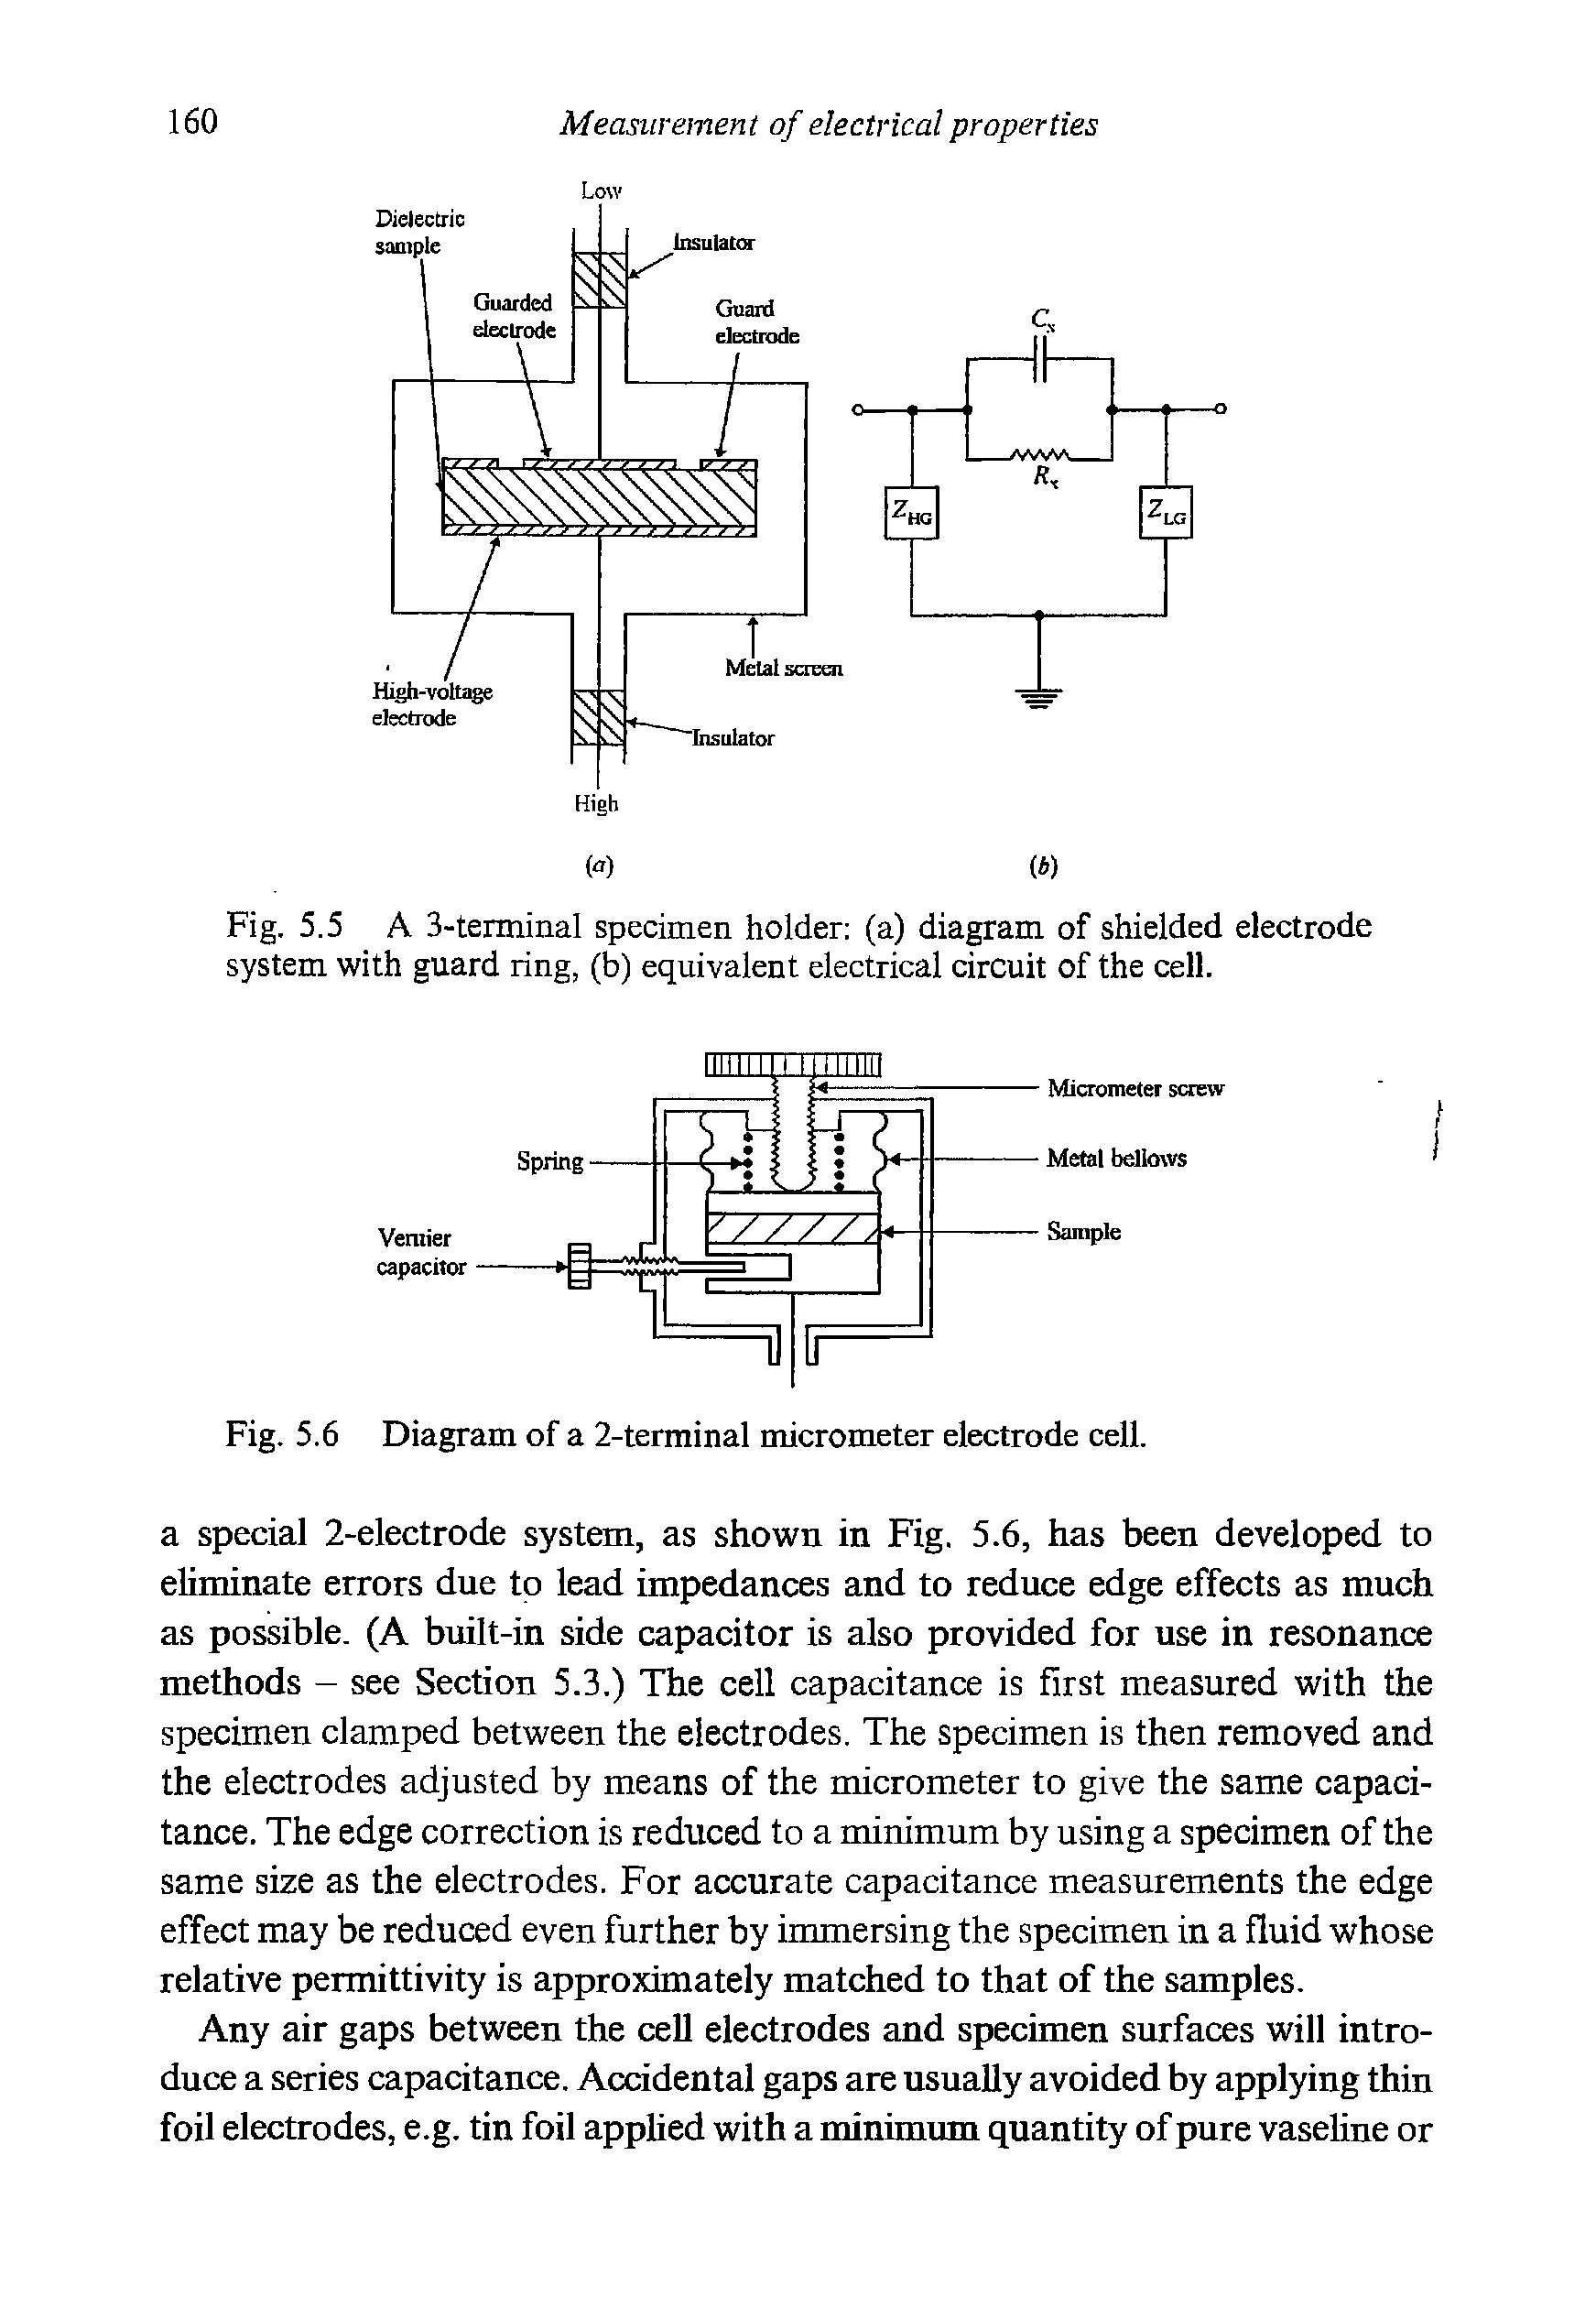 Fig. 5.5 A 3-terminal specimen holder (a) diagram of shielded electrode system with guard ring, (b) equivalent electrical circuit of the cell.